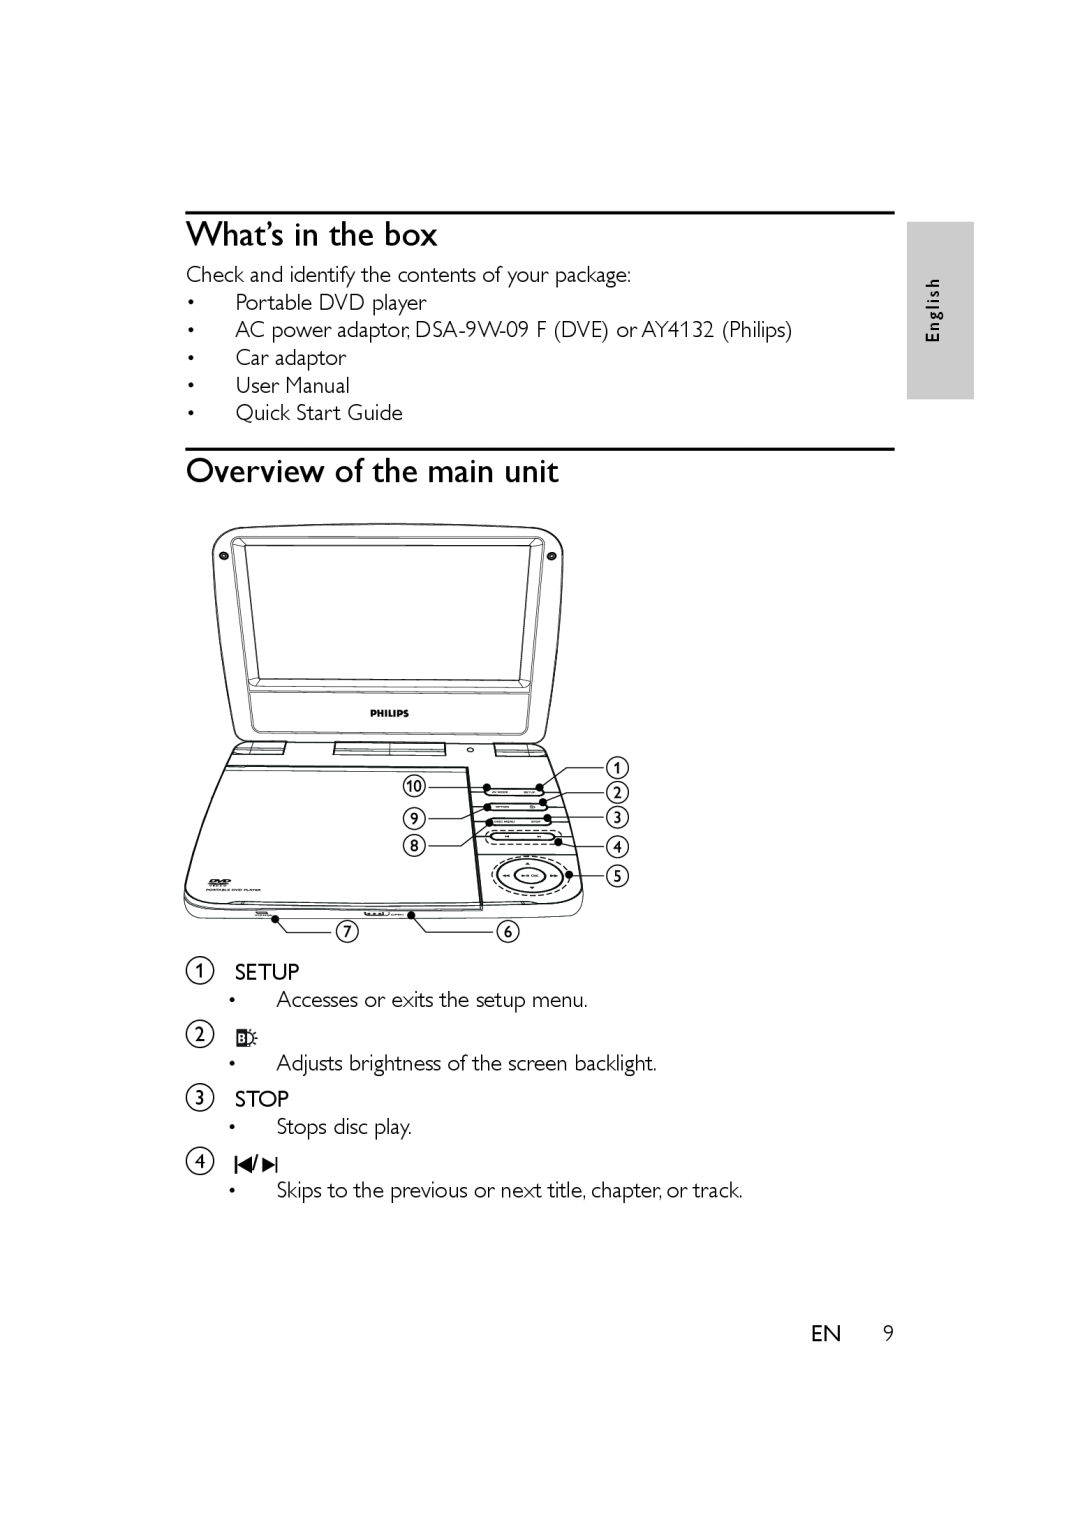 Philips PET721S/05, PET721D/05, PET721C/05 What’s in the box, Overview of the main unit, User Manual Quick Start Guide 